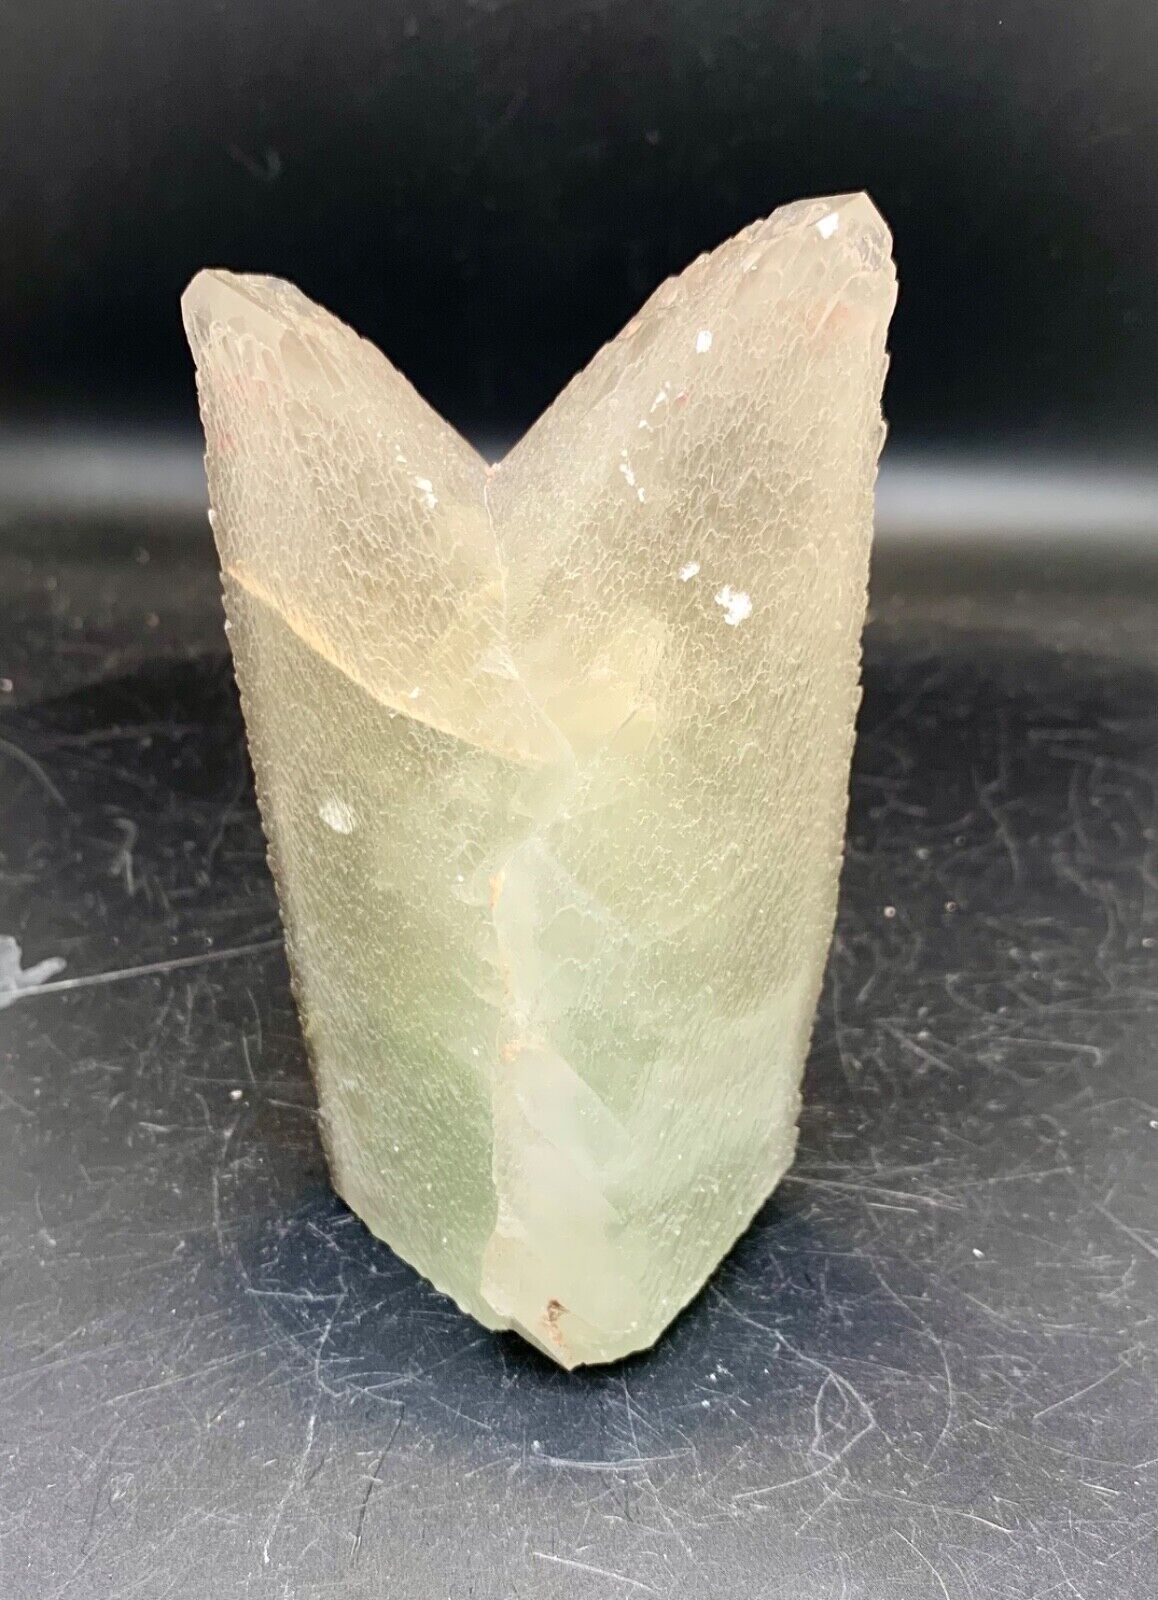 638 Gram self stand twin calcite crystal from Baluchistan Pakistan.